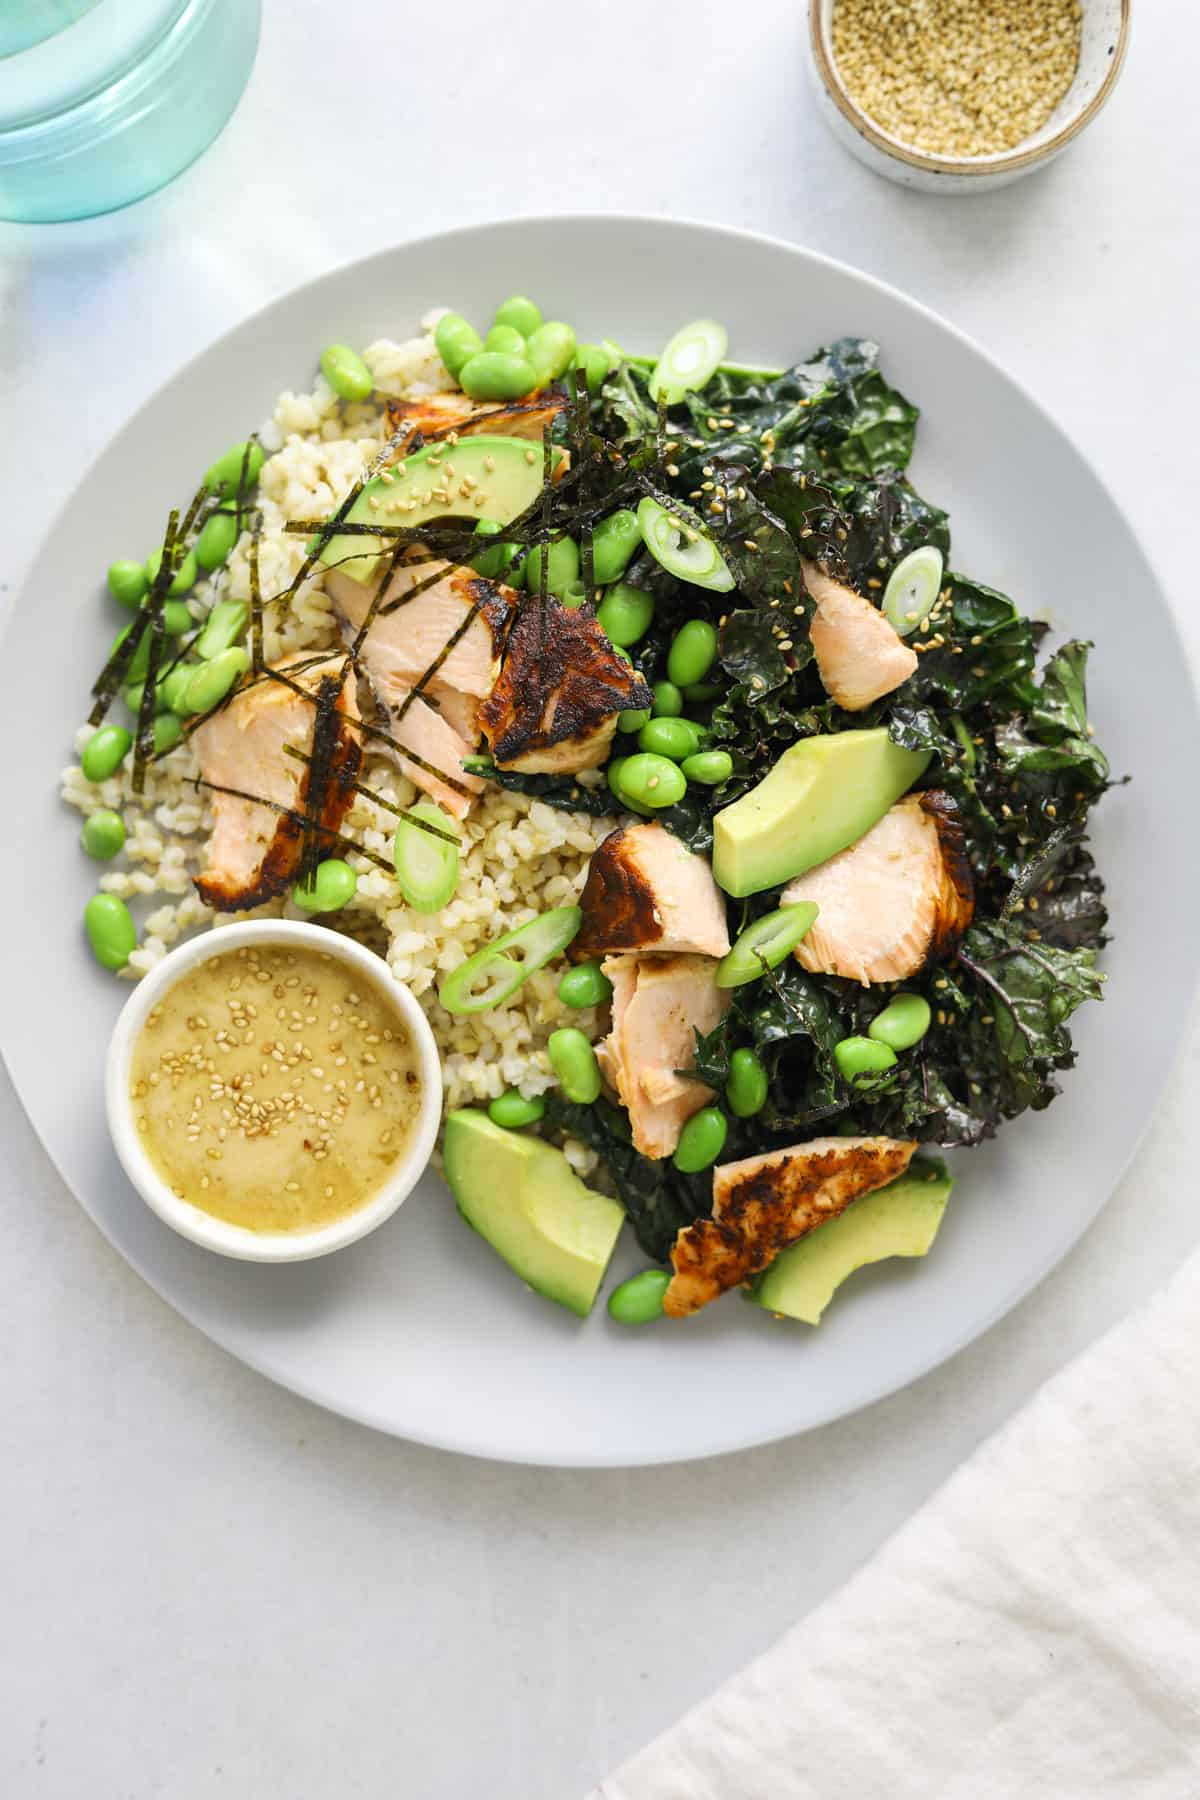 a close up of a plate of brown rice, salmon and kale salad with a small side bowl of miso dressing topped with toasted sesame seeds